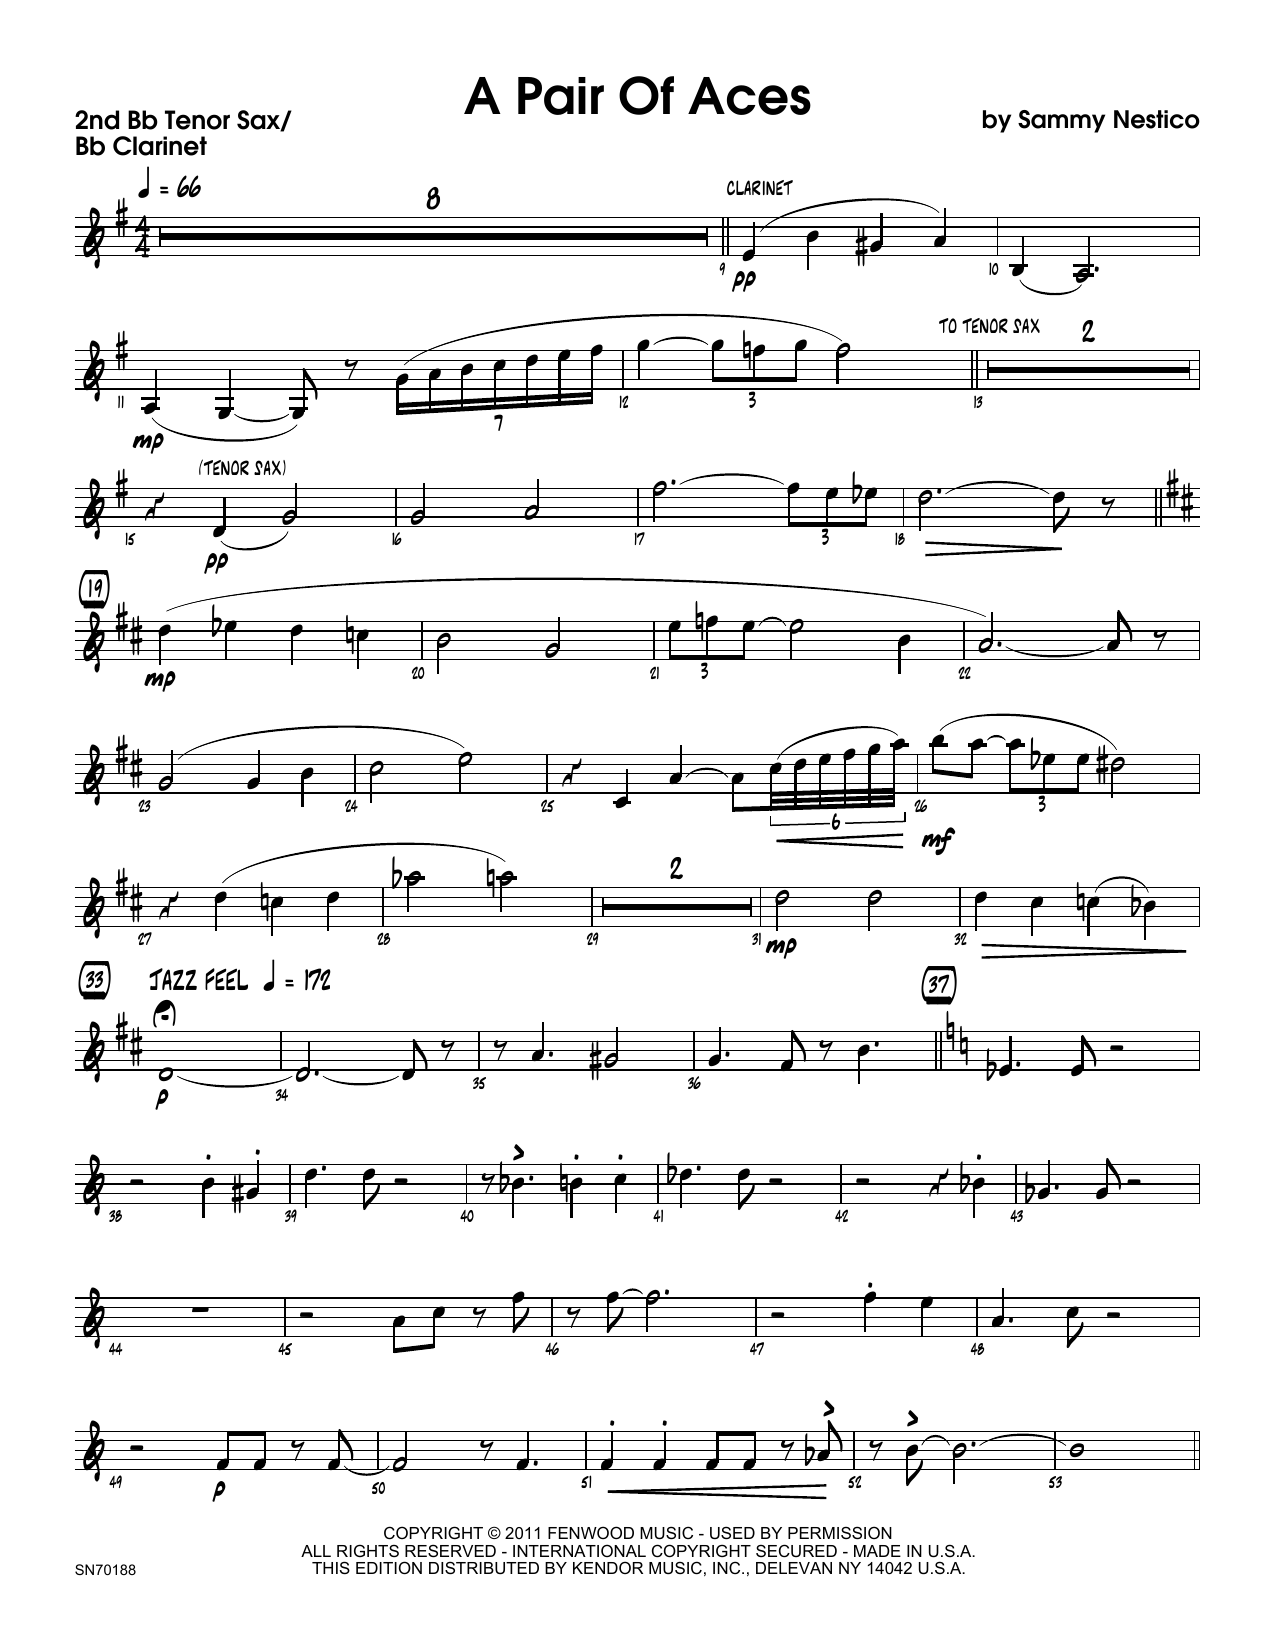 Download Sammy Nestico A Pair Of Aces - 2nd Bb Tenor Saxophone Sheet Music